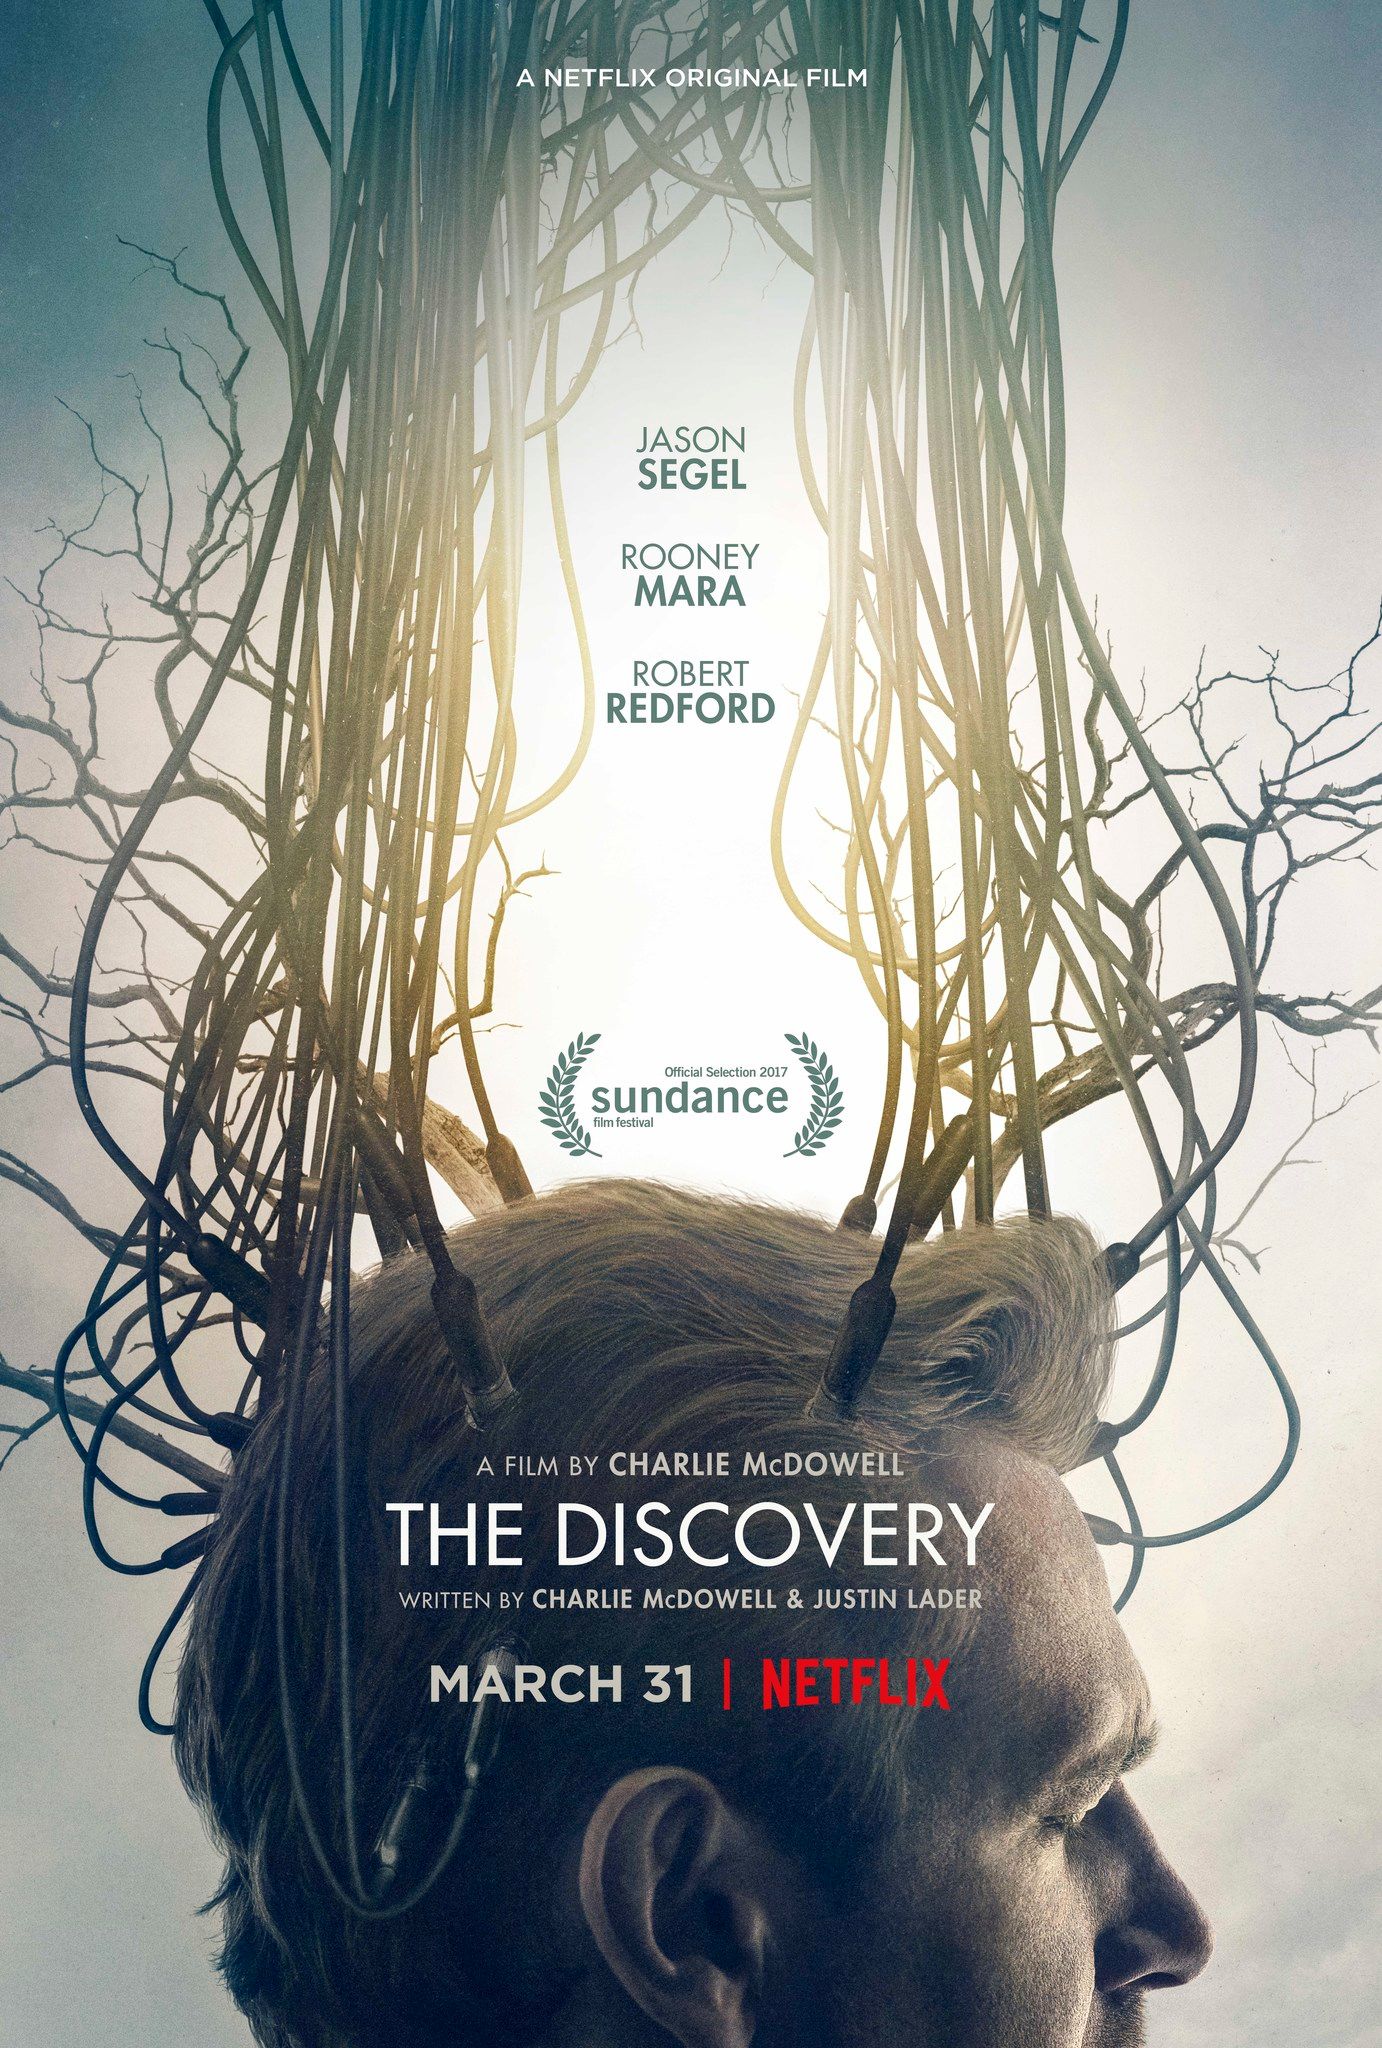 The Discovery Netflix Poster